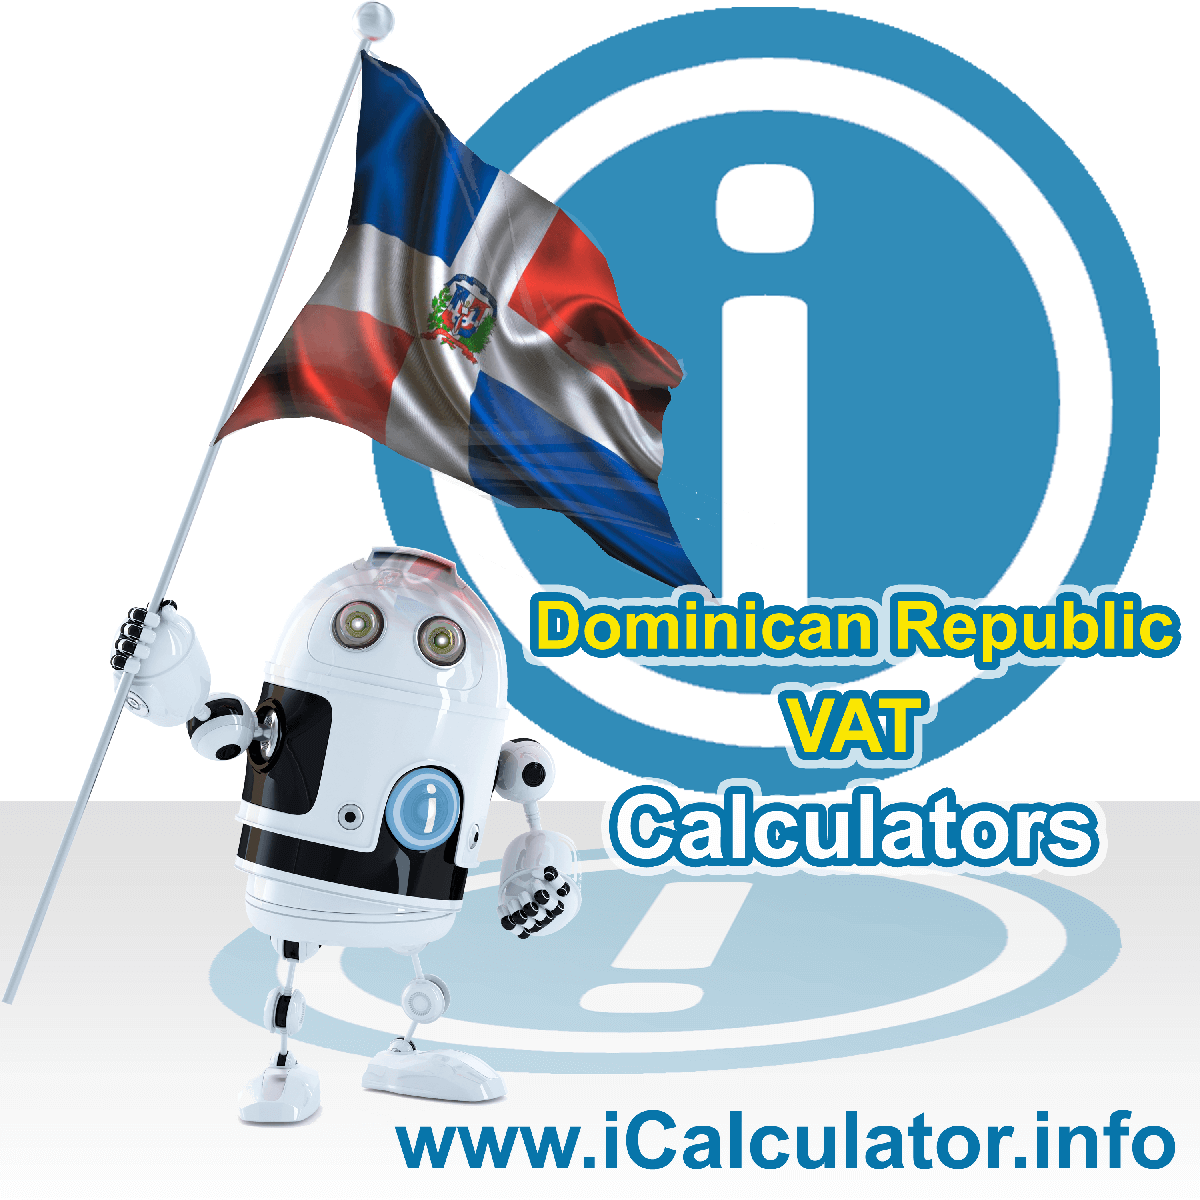 Dominican Republic VAT Calculator. This image shows the Dominican Republic flag and information relating to the VAT formula used for calculating Value Added Tax in Dominican Republic using the Dominican Republic VAT Calculator in 2023